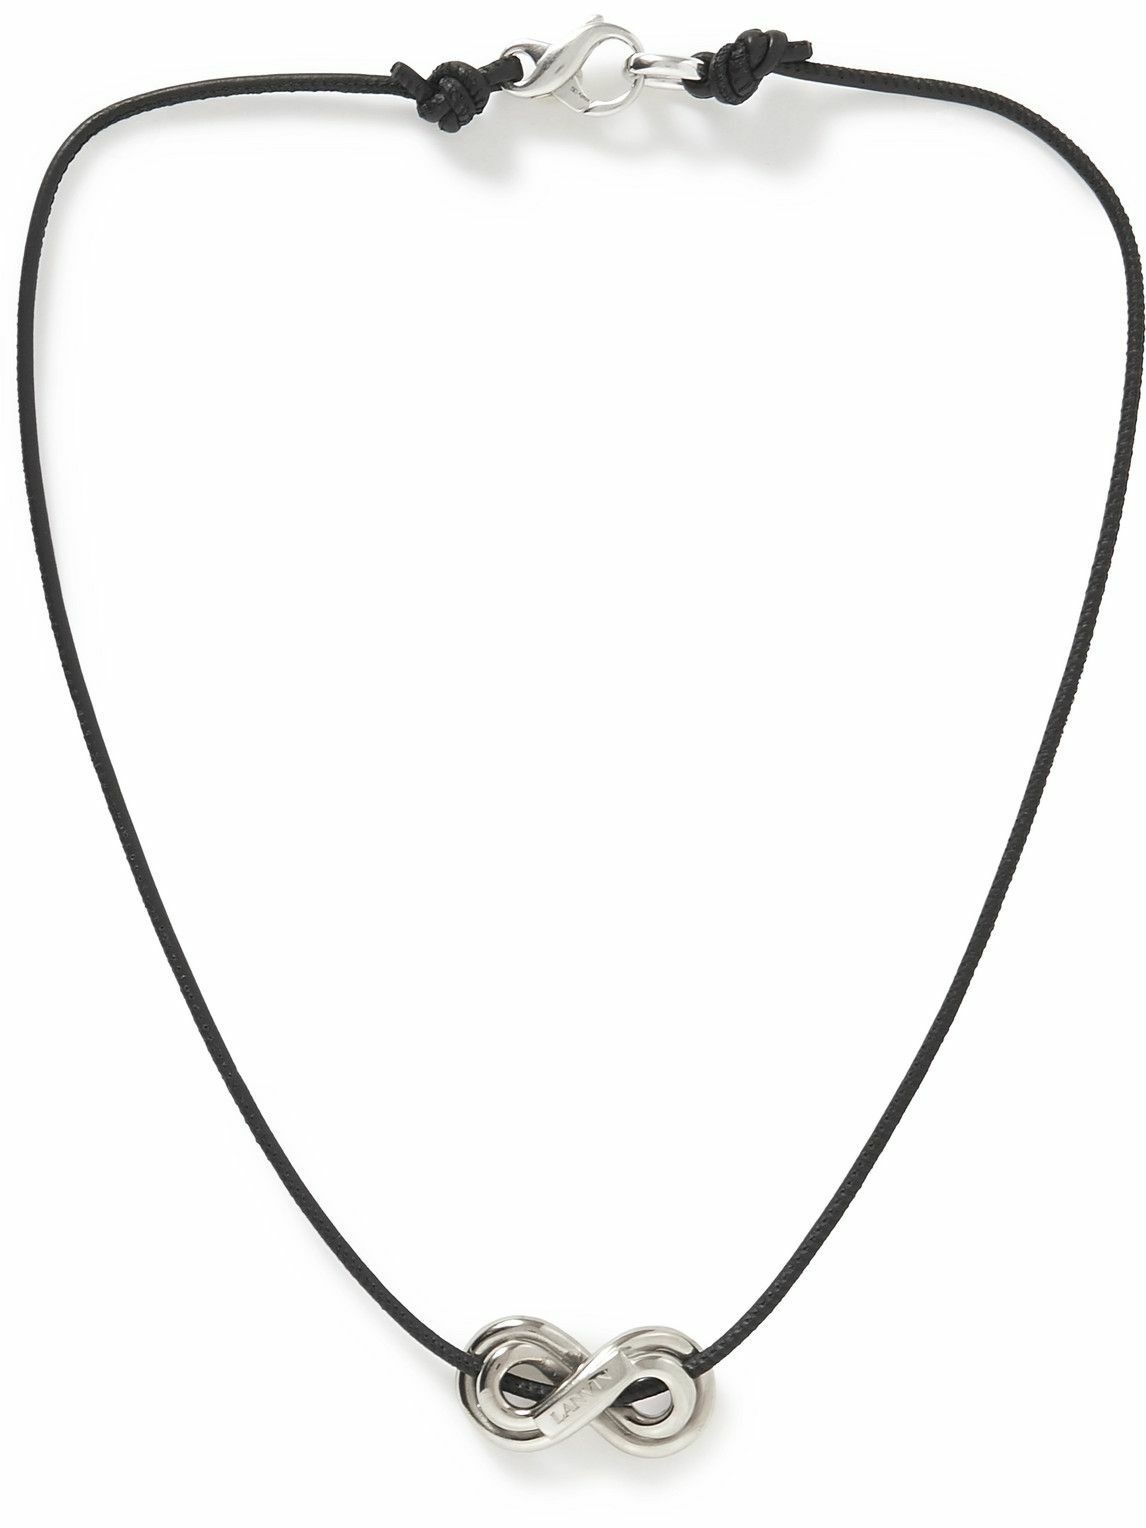 Lanvin - Platinum-Plated and Leather Necklace Lanvin